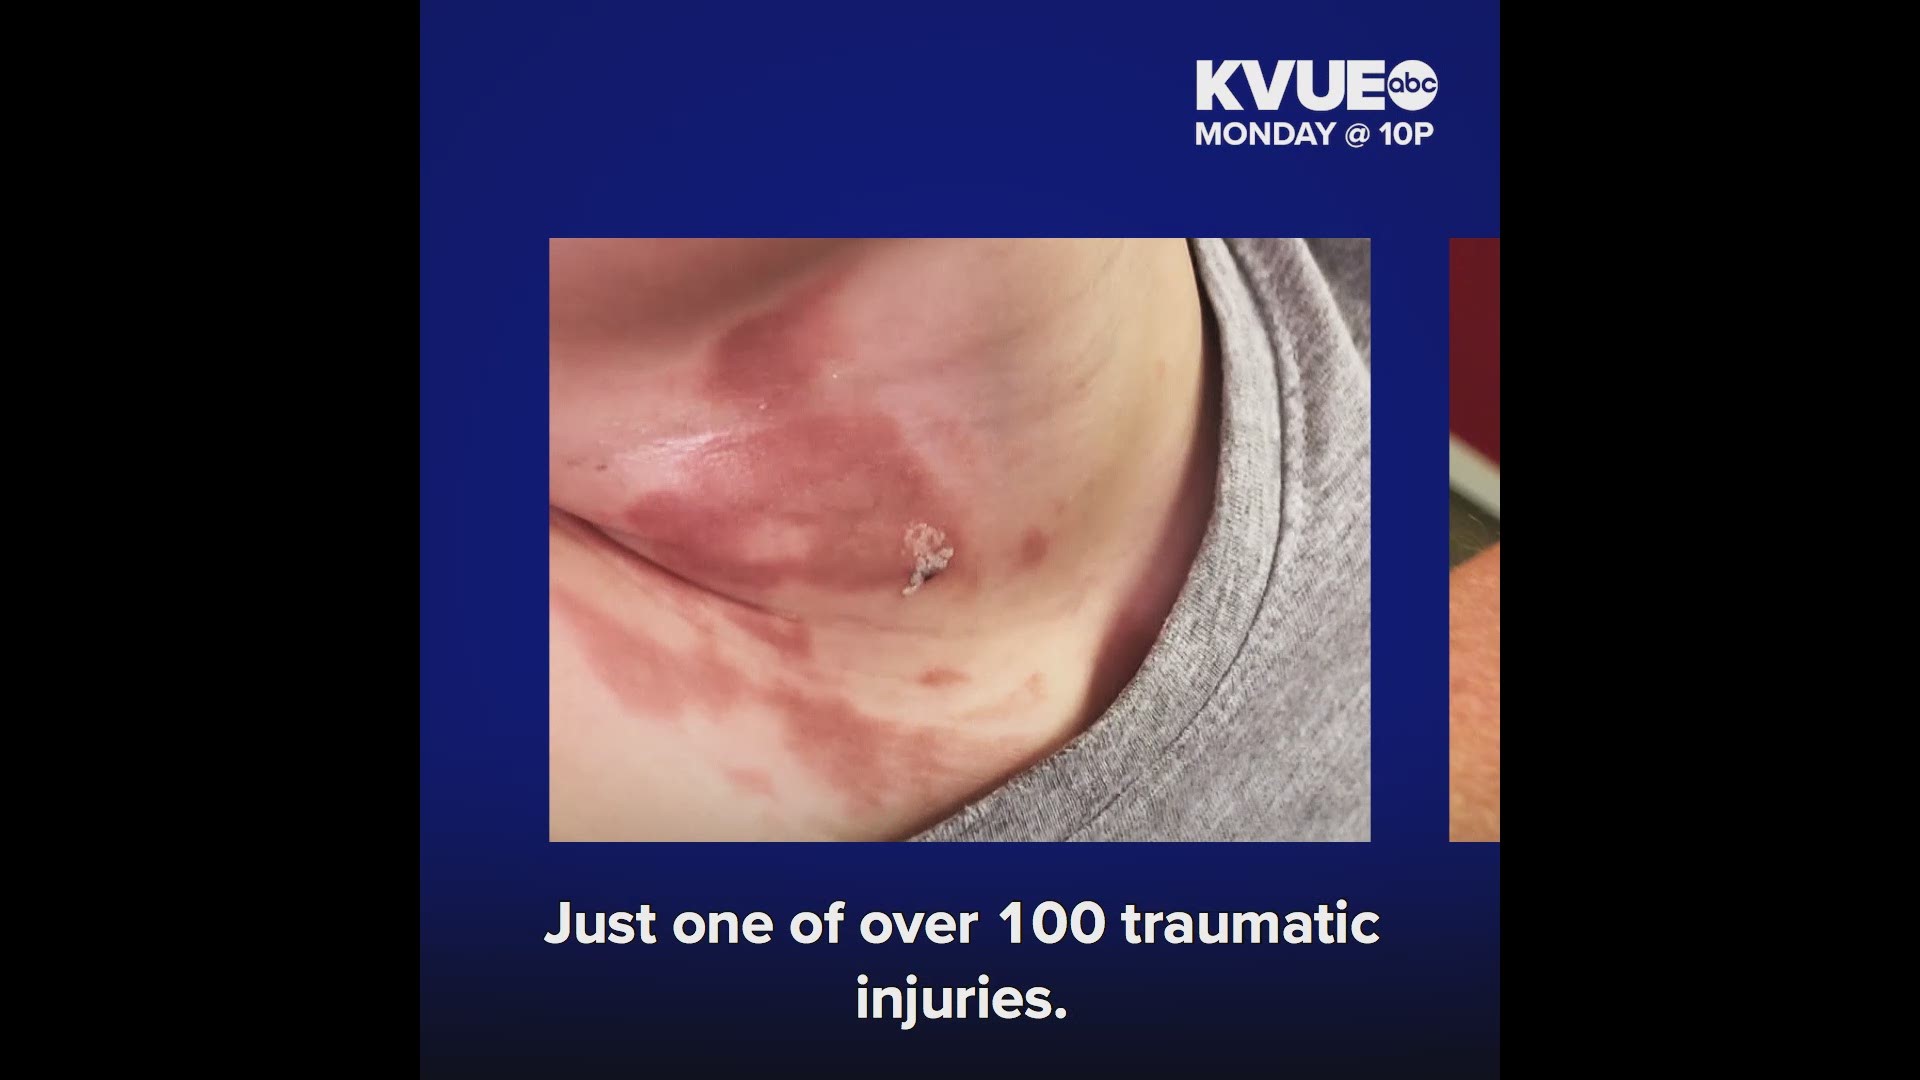 One girl's experience was just one of more than 100 traumatic injuries. Could it have been prevented? Tune in to KVUE at 10 p.m.